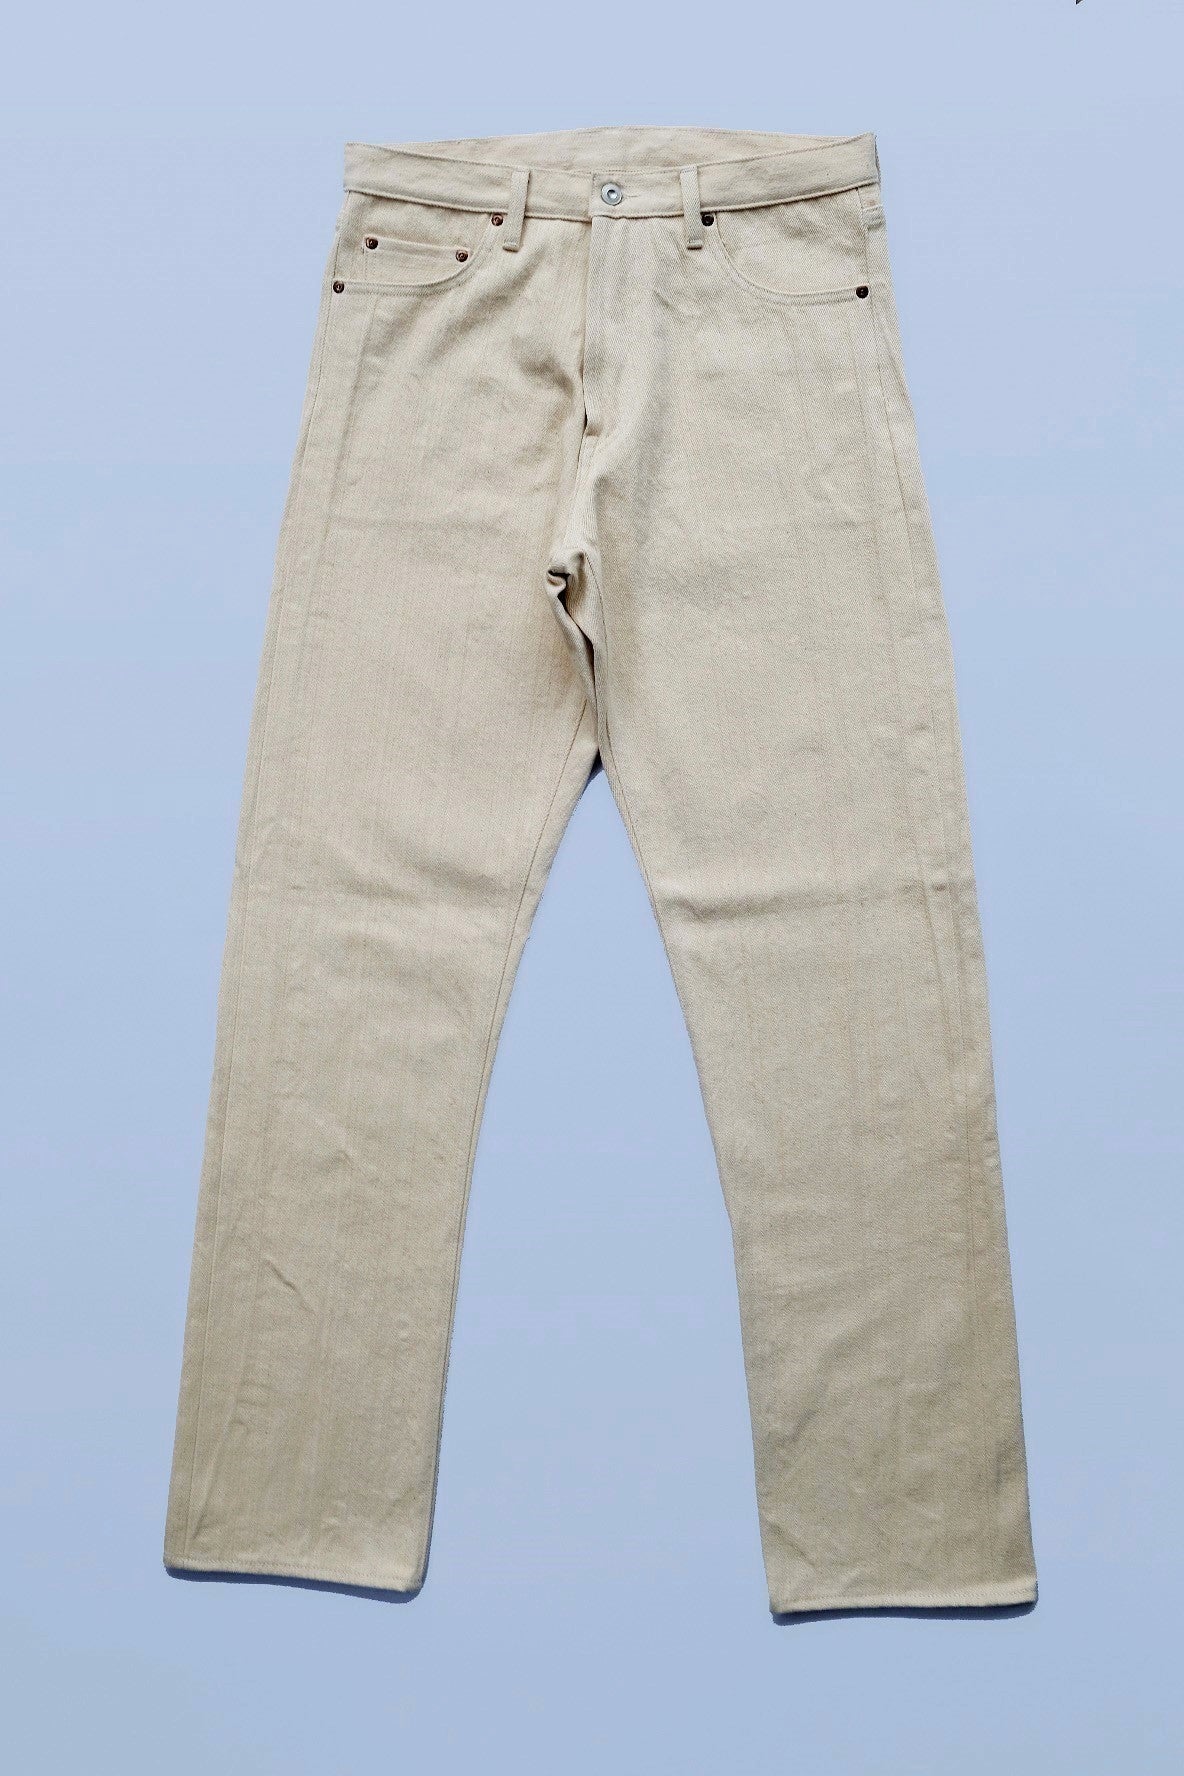 LD1966 Jeans in 16 oz. Natural Twill